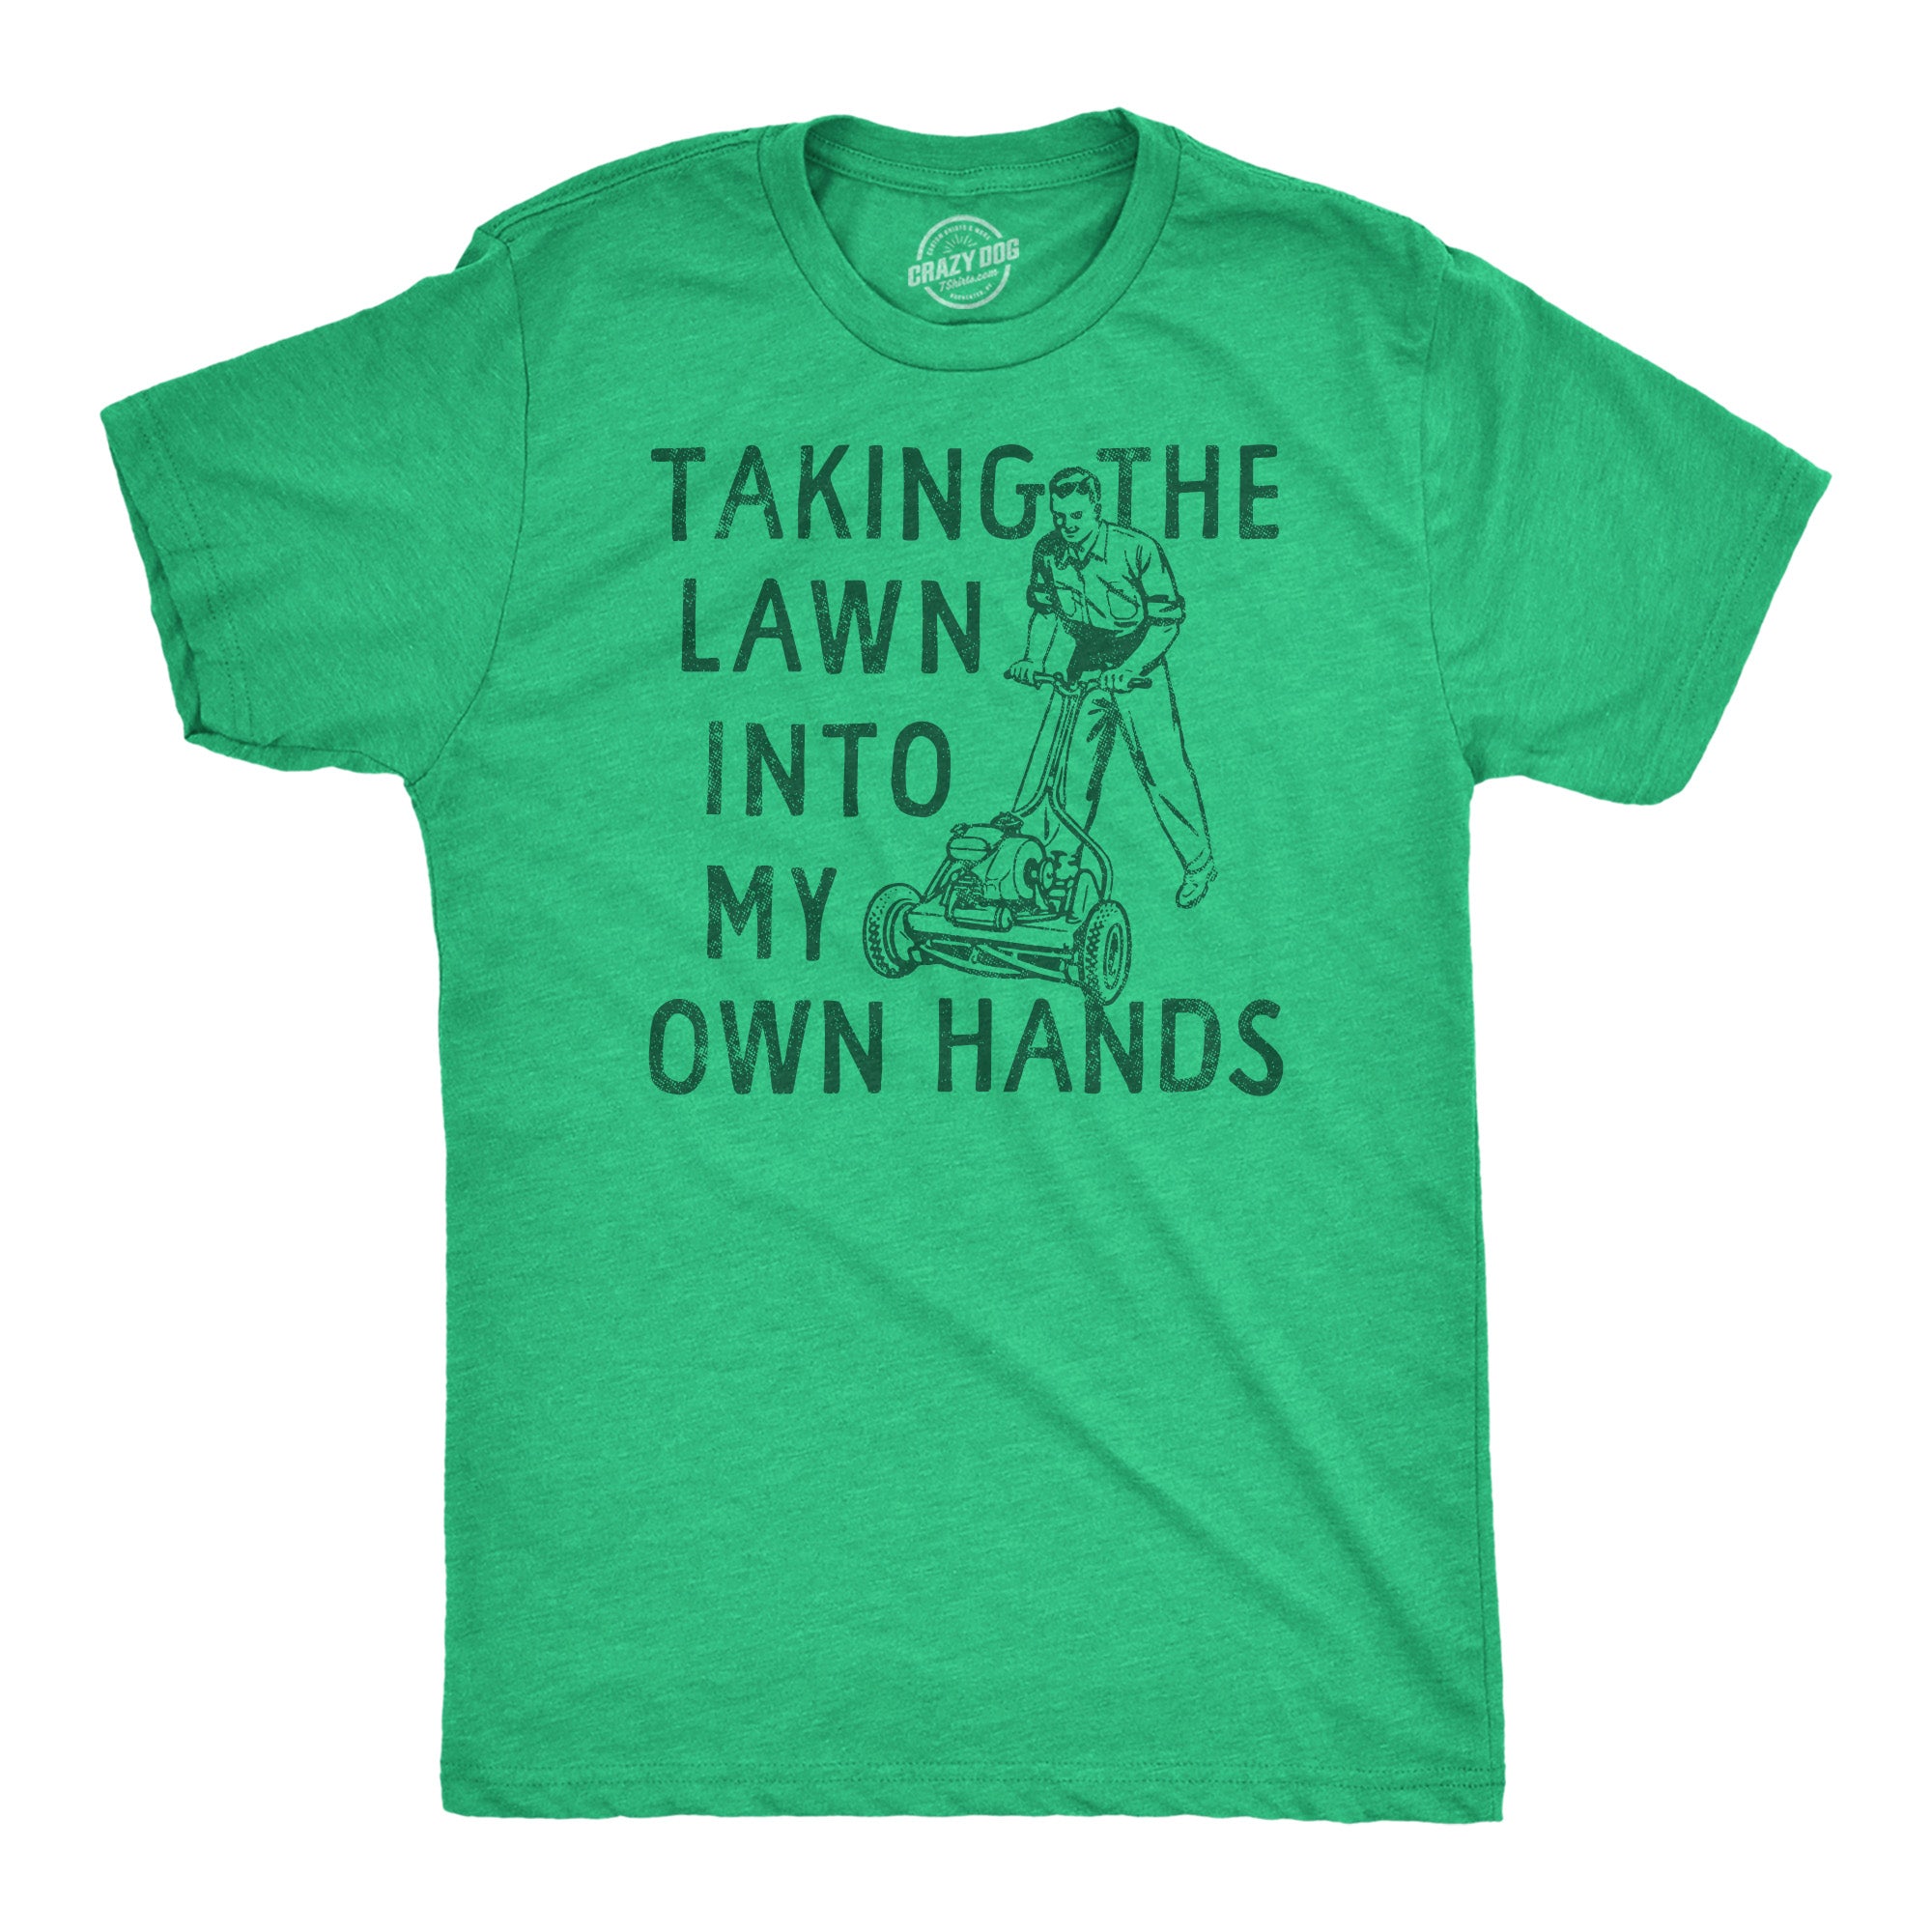 Funny Heather Green - Lawn Into My Own Hands Taking The Lawn Into My Own Hands Mens T Shirt Nerdy Sarcastic Tee